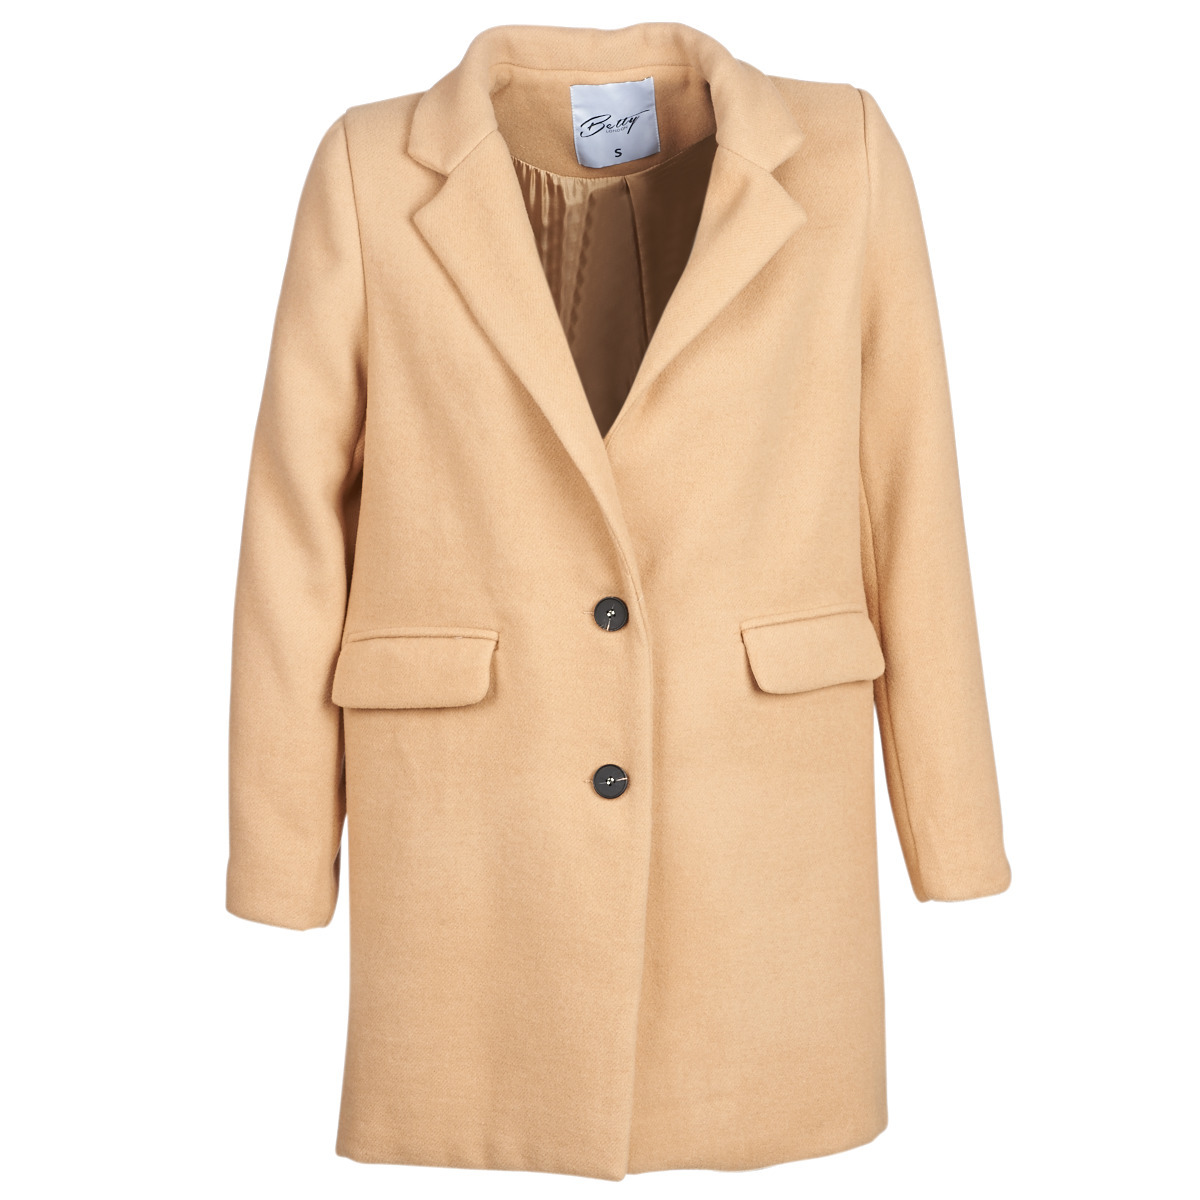 Coat in Beige for Woman at Spartoo GOOFASH